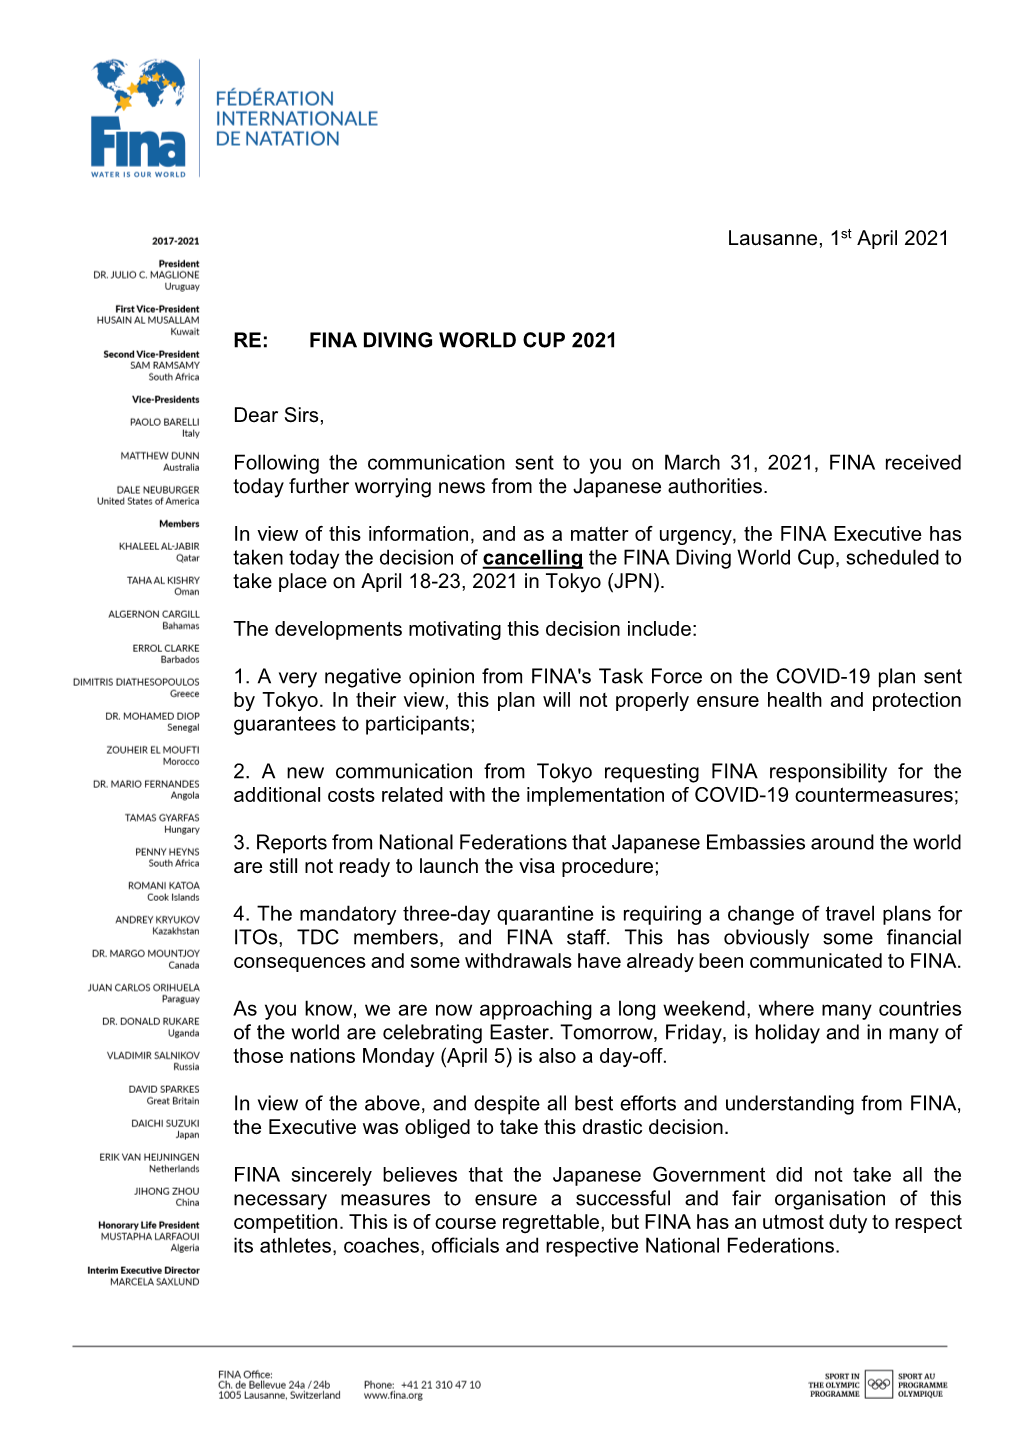 FINA DIVING WORLD CUP 2021 Dear Sirs, Following the Communication